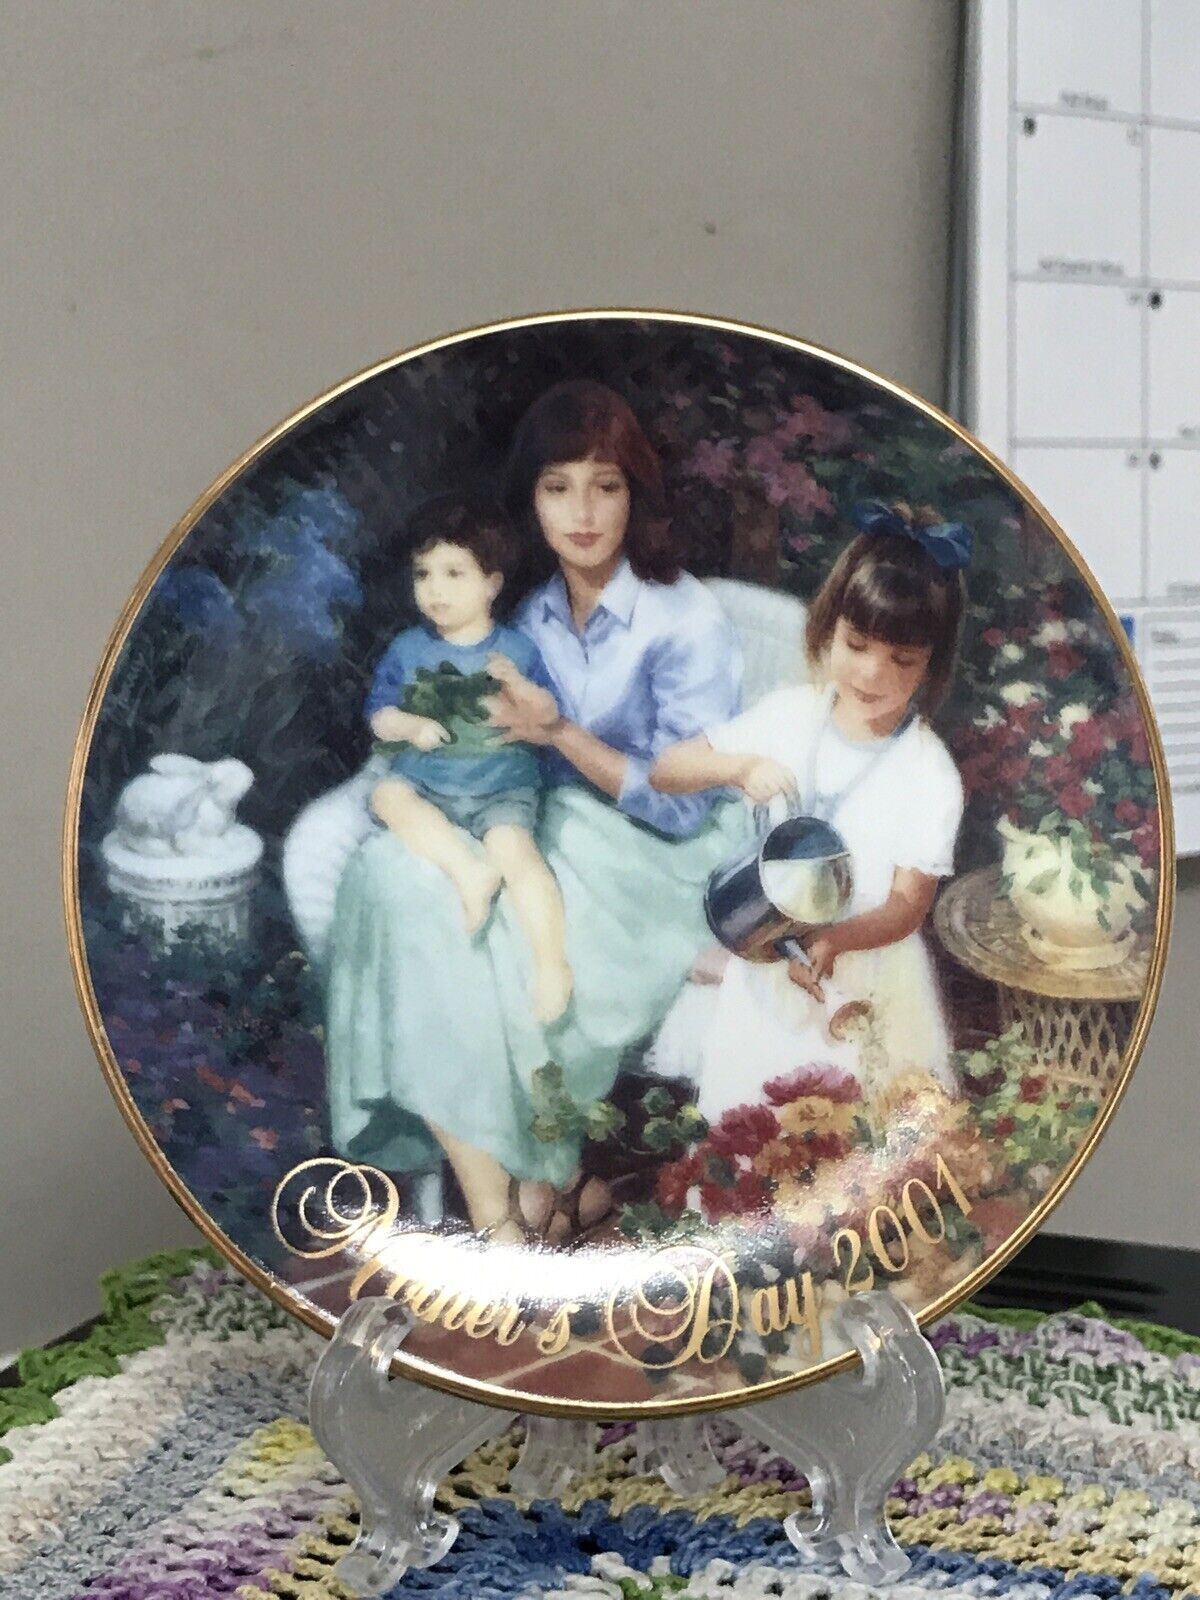 New In Box AVON Mother\'s Day Plate “Blossoms Of Love 2001” 5” W/Stand Porcelain